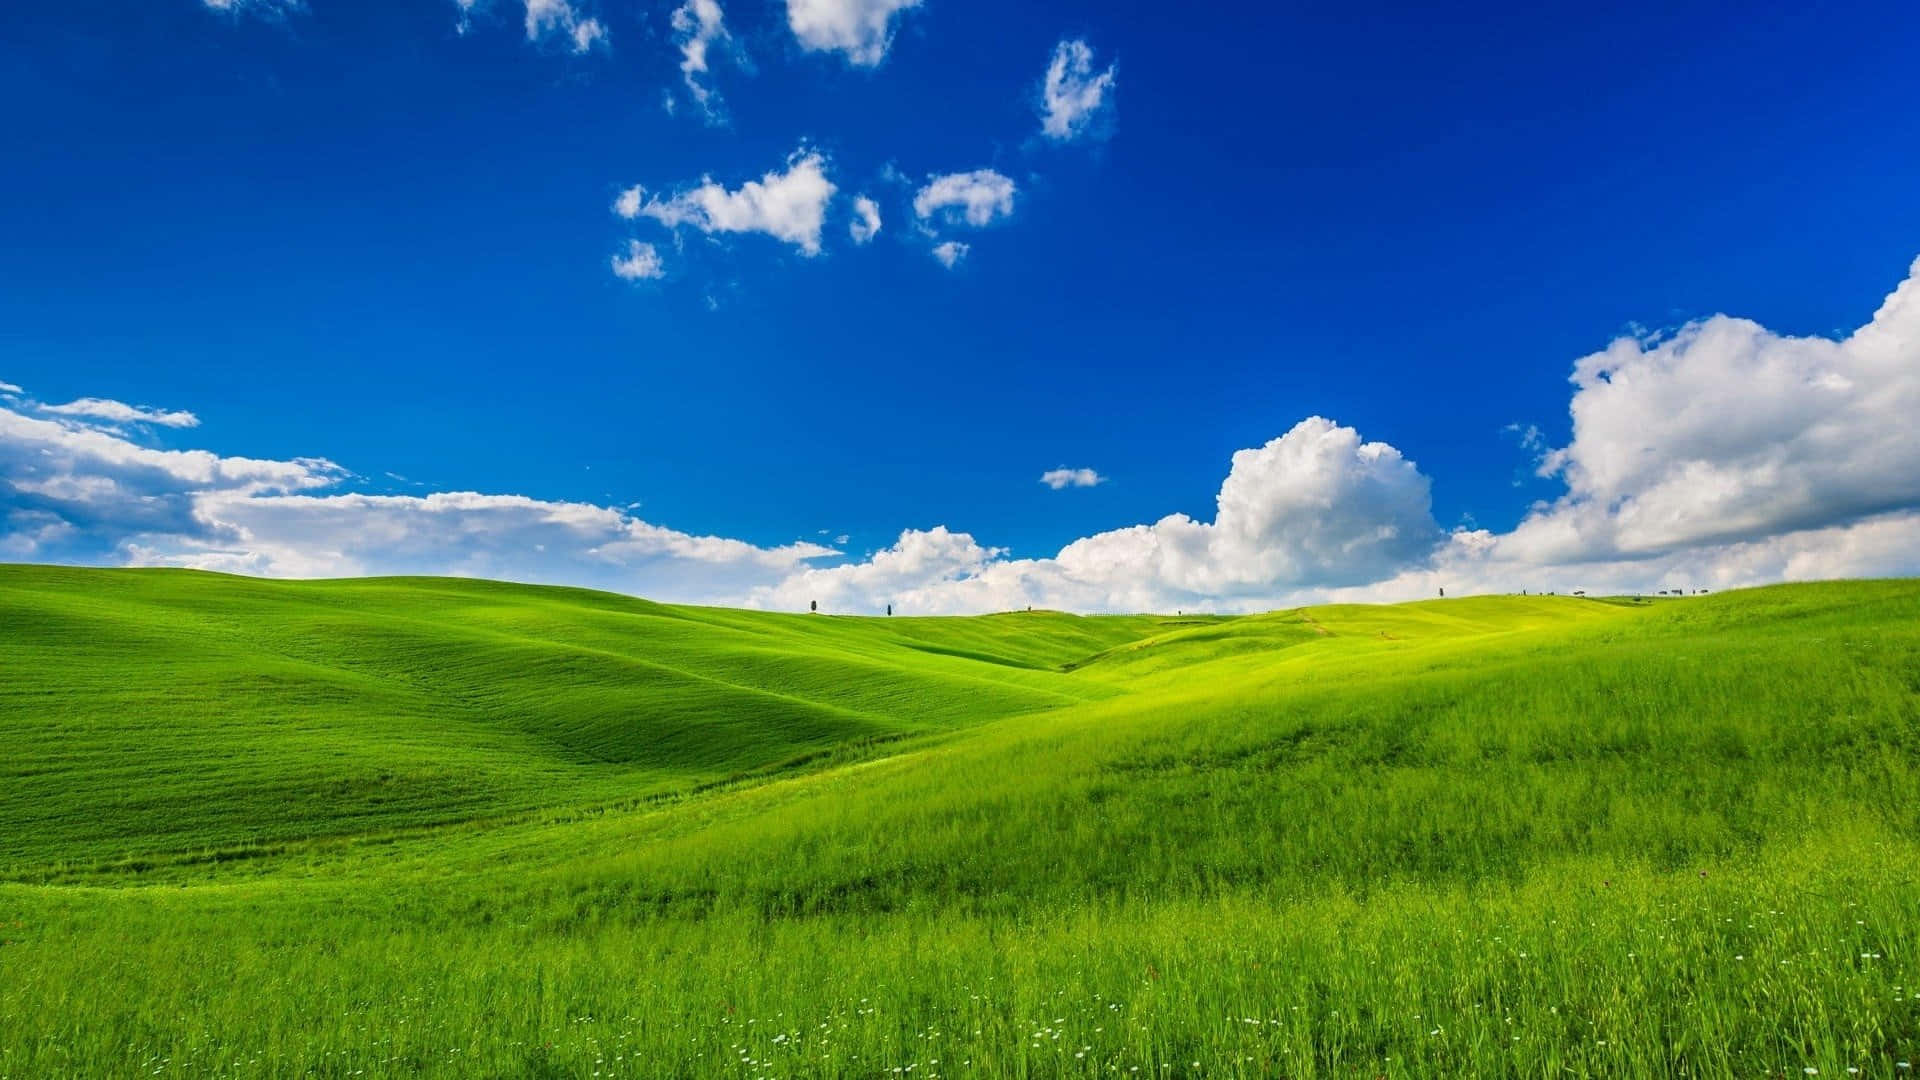 Windows XP Grass Hill And Sky Background